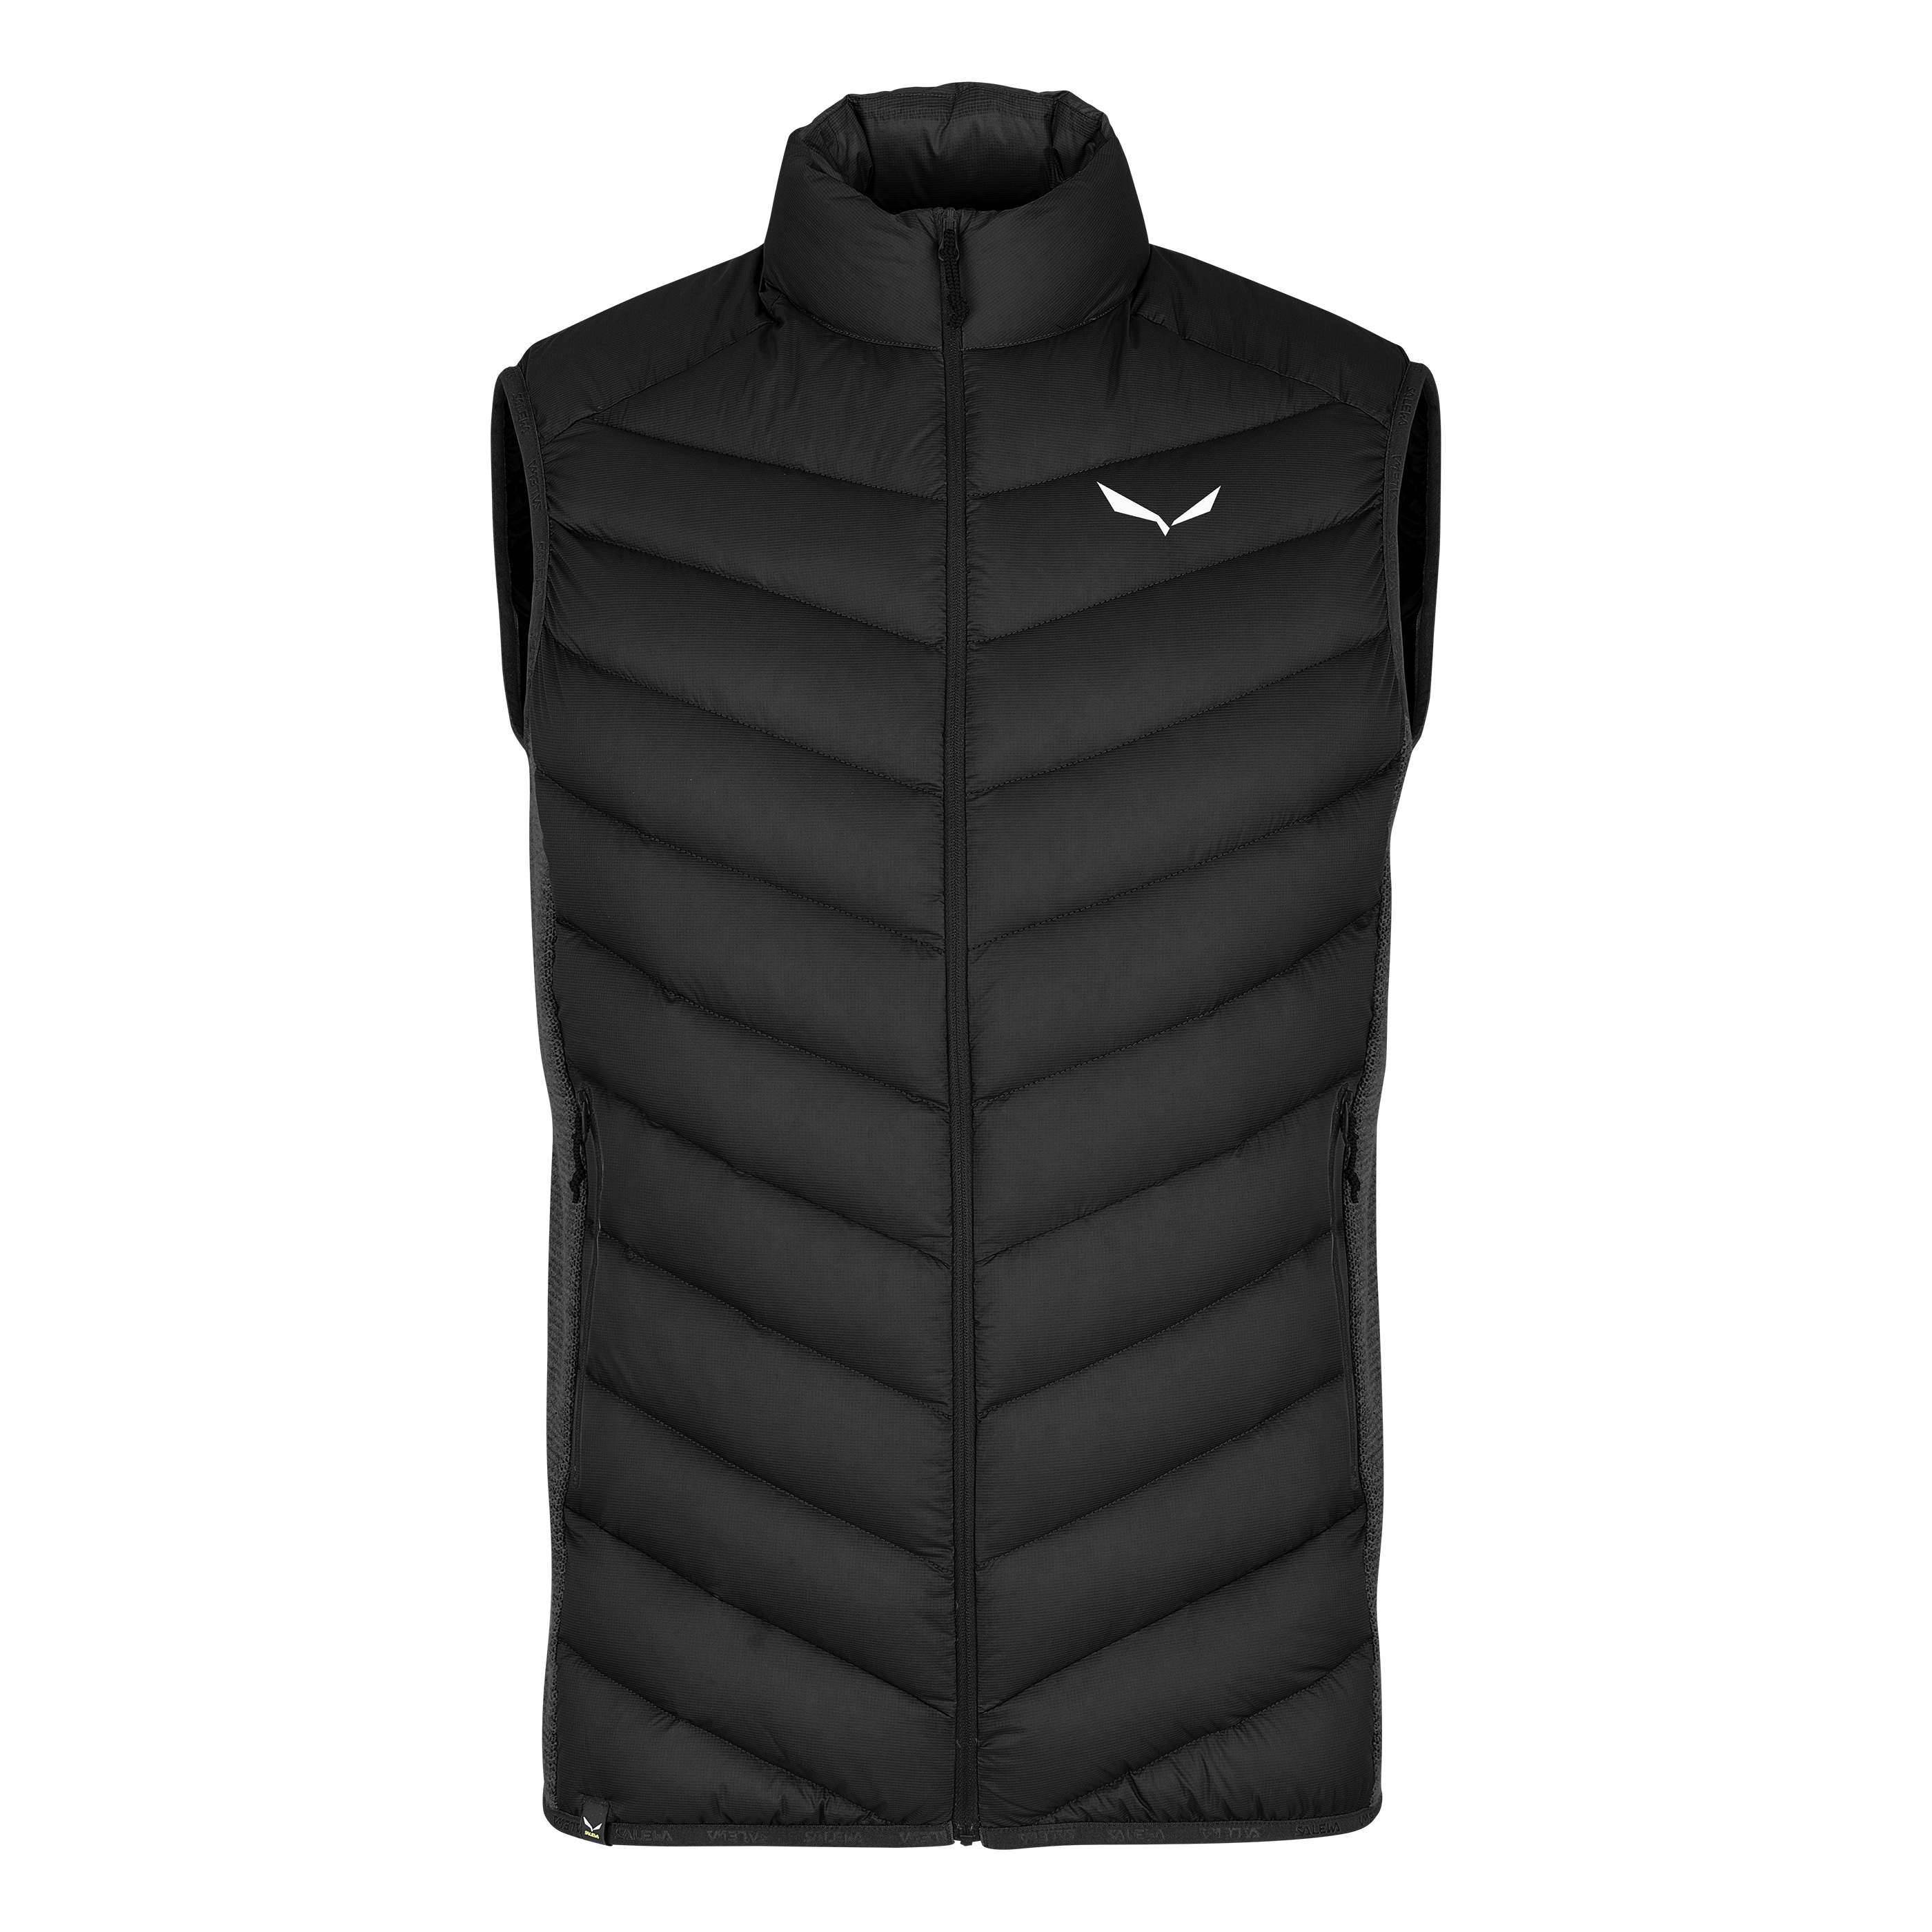 Vests for Men · Outdoor Sports | Salewa® USA